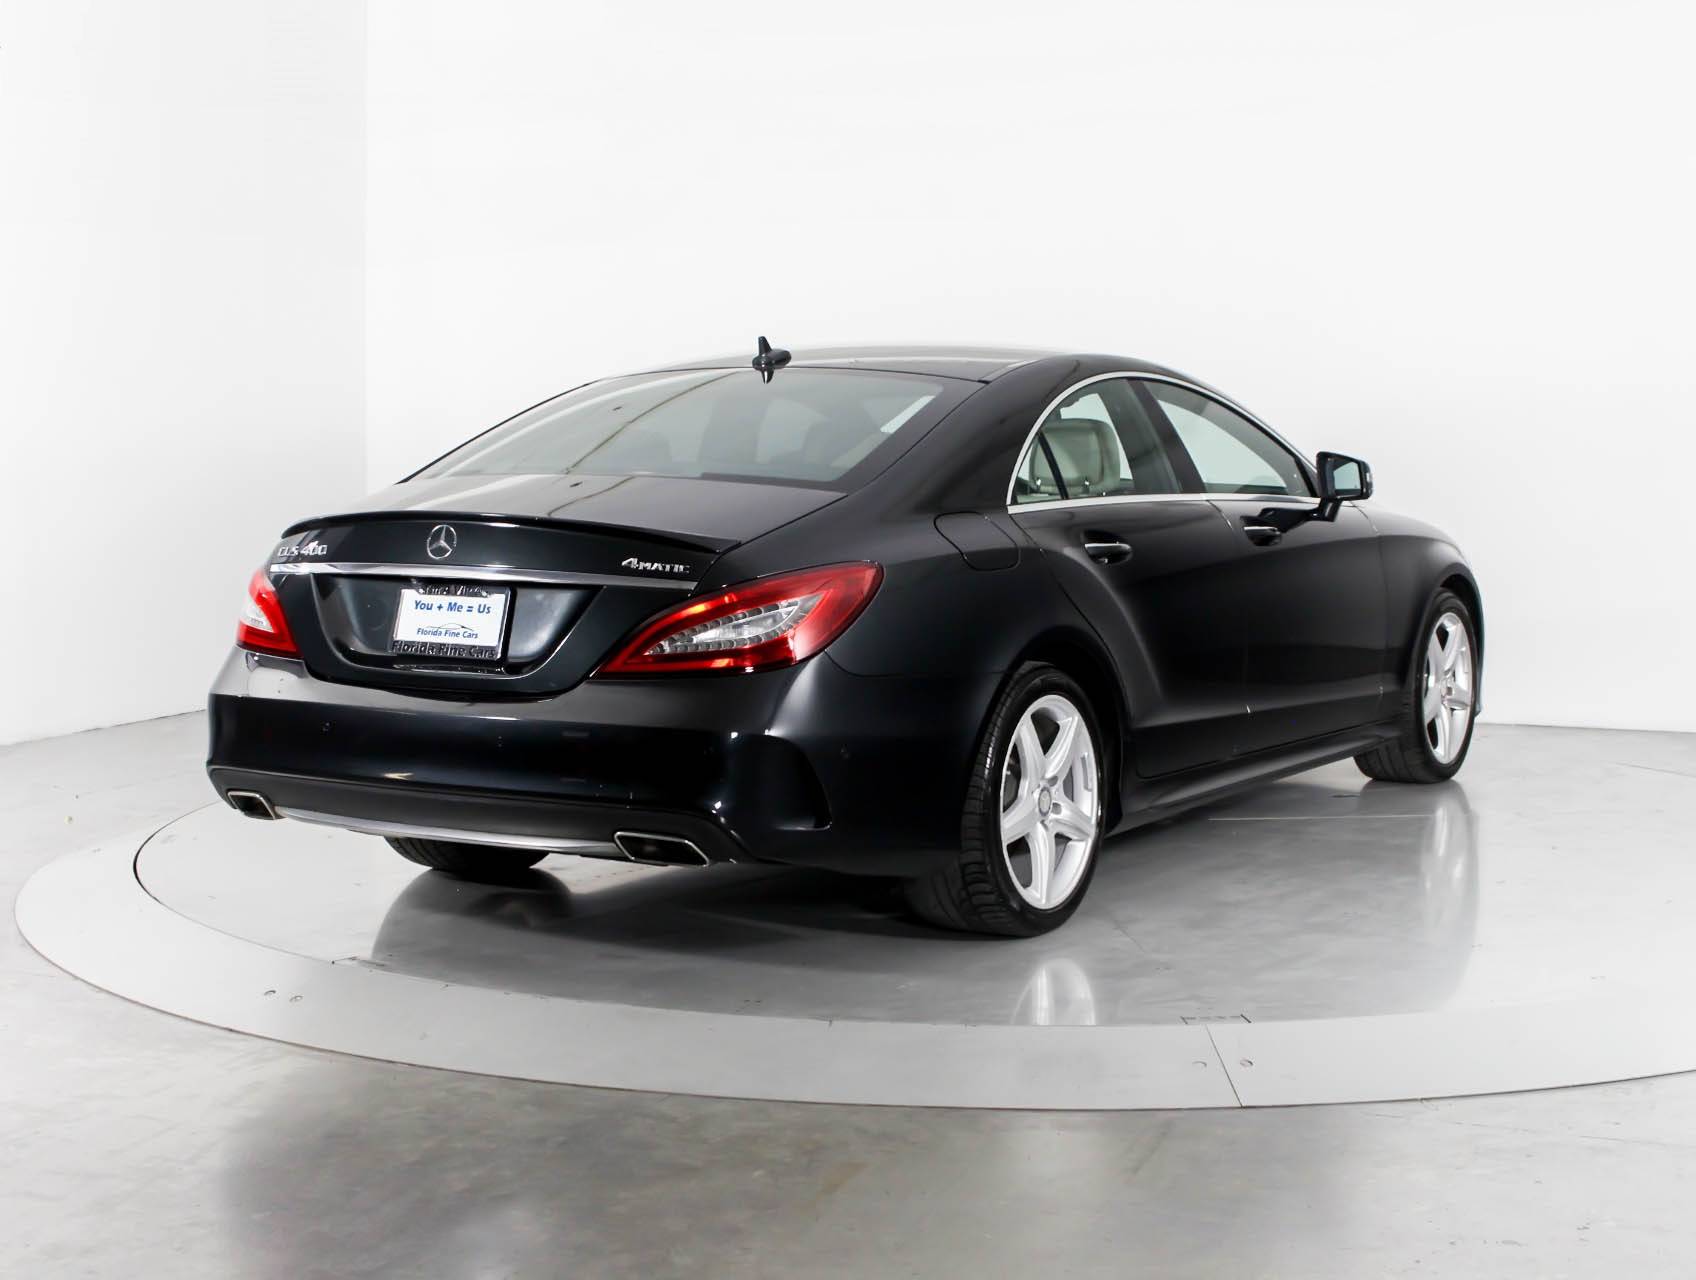 Florida Fine Cars - Used MERCEDES-BENZ CLS CLASS 2015 WEST PALM CLS400 4MATIC